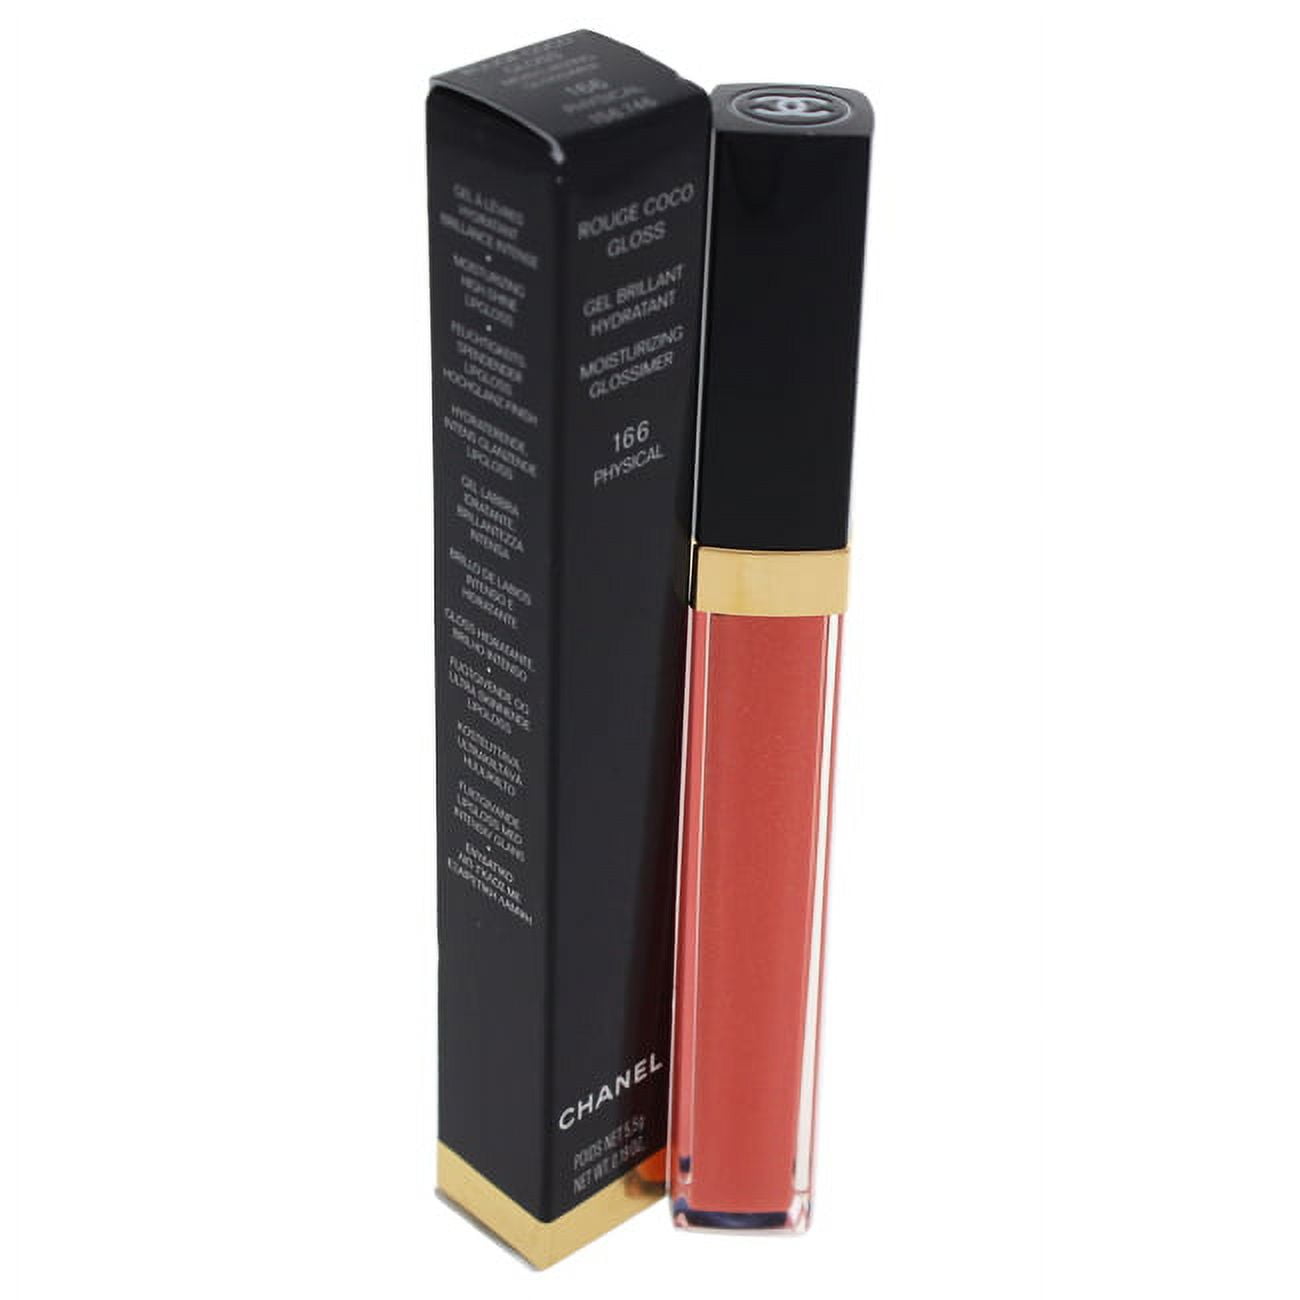 Chanel Rouge Coco Gloss Moisturizing Glossimer - # 166 Physical - Stylemyle